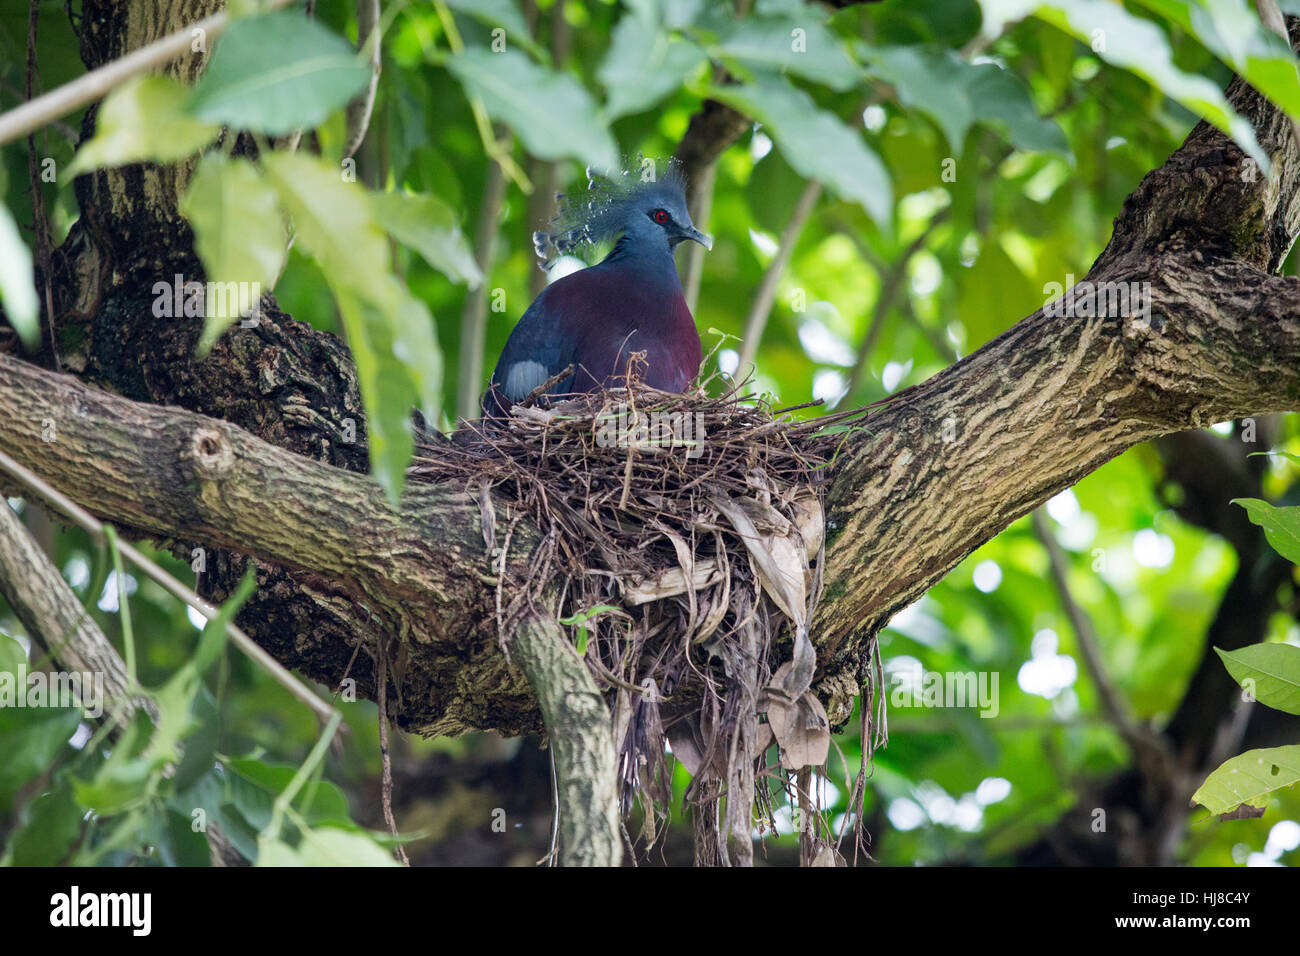 Victoria crowned pigeon - Goura Victoria - is a large blue gray pigeon that lives in the Papua New Guinea region. Stock Photo